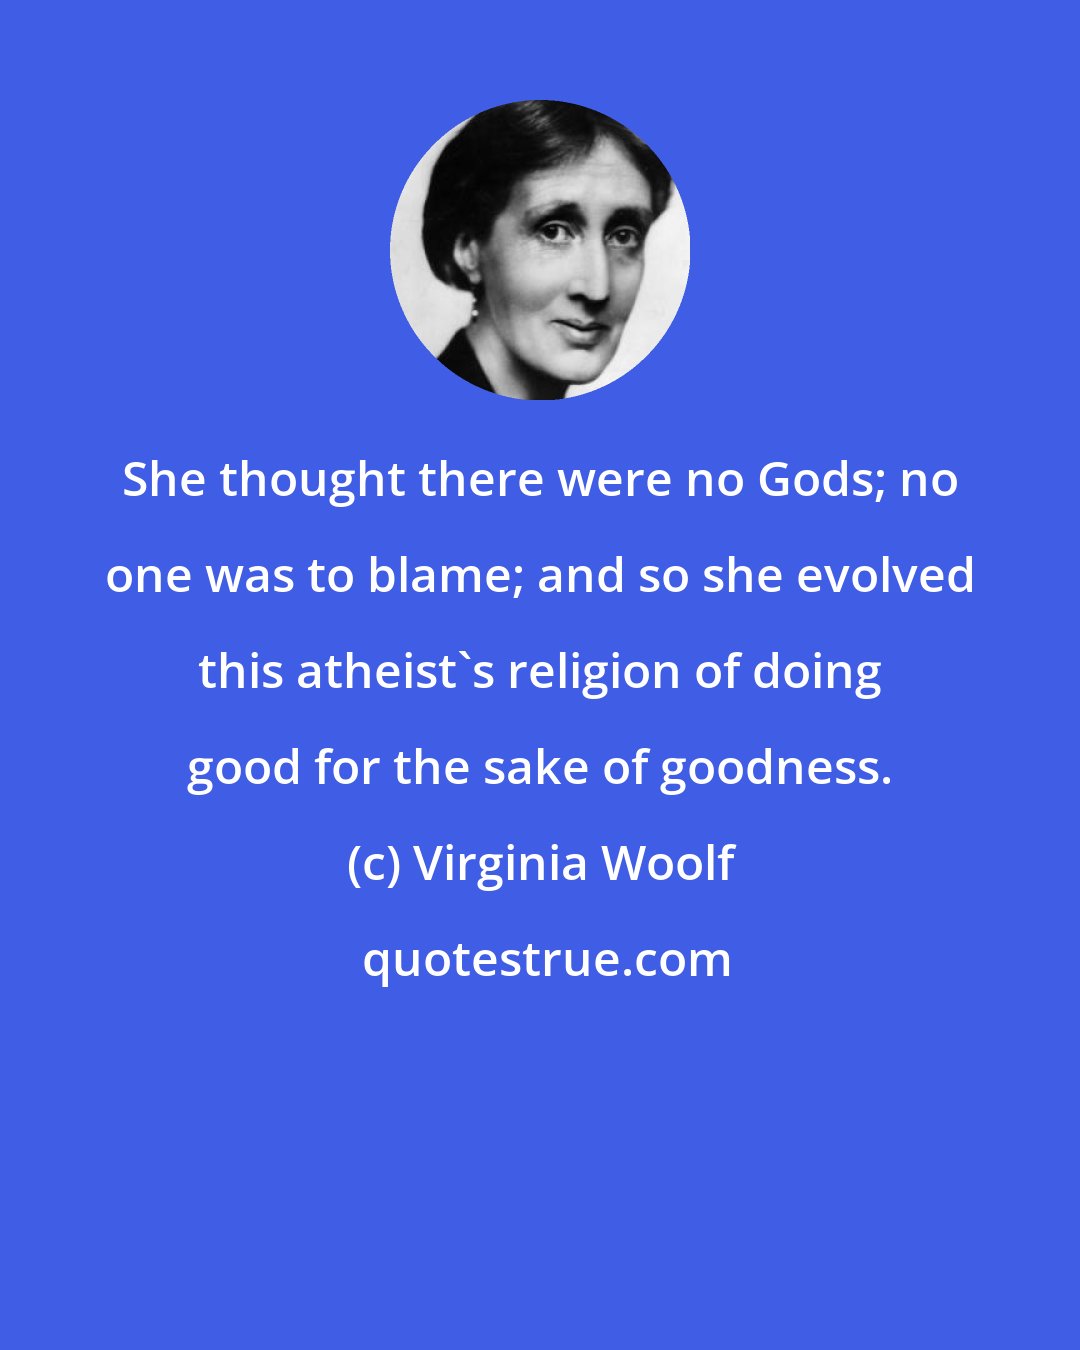 Virginia Woolf: She thought there were no Gods; no one was to blame; and so she evolved this atheist's religion of doing good for the sake of goodness.